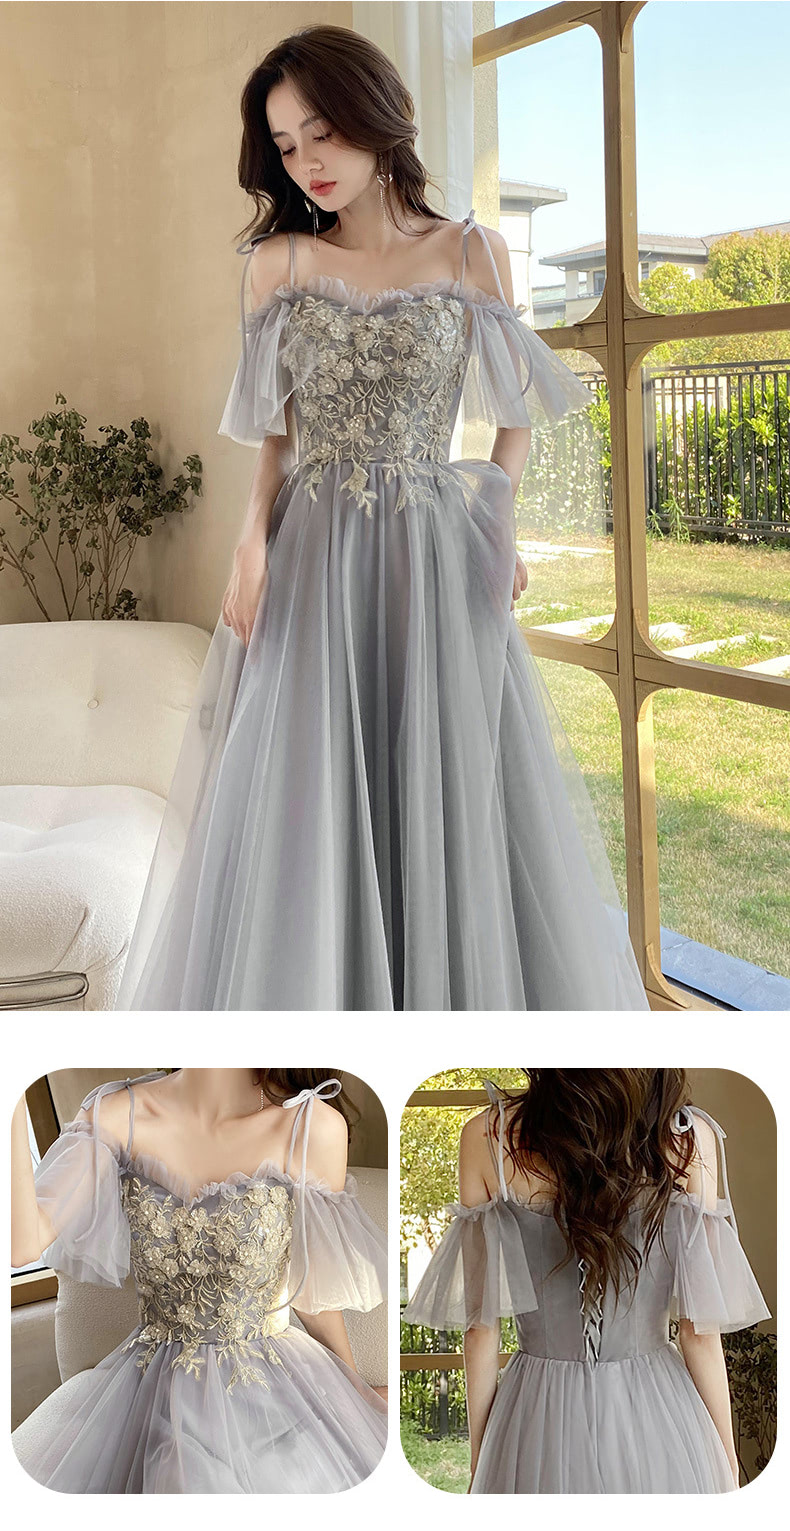 Floral-Embroidery-Gray-Bridesmaid-Party-Formal-Maxi-Long-Dress19.jpg